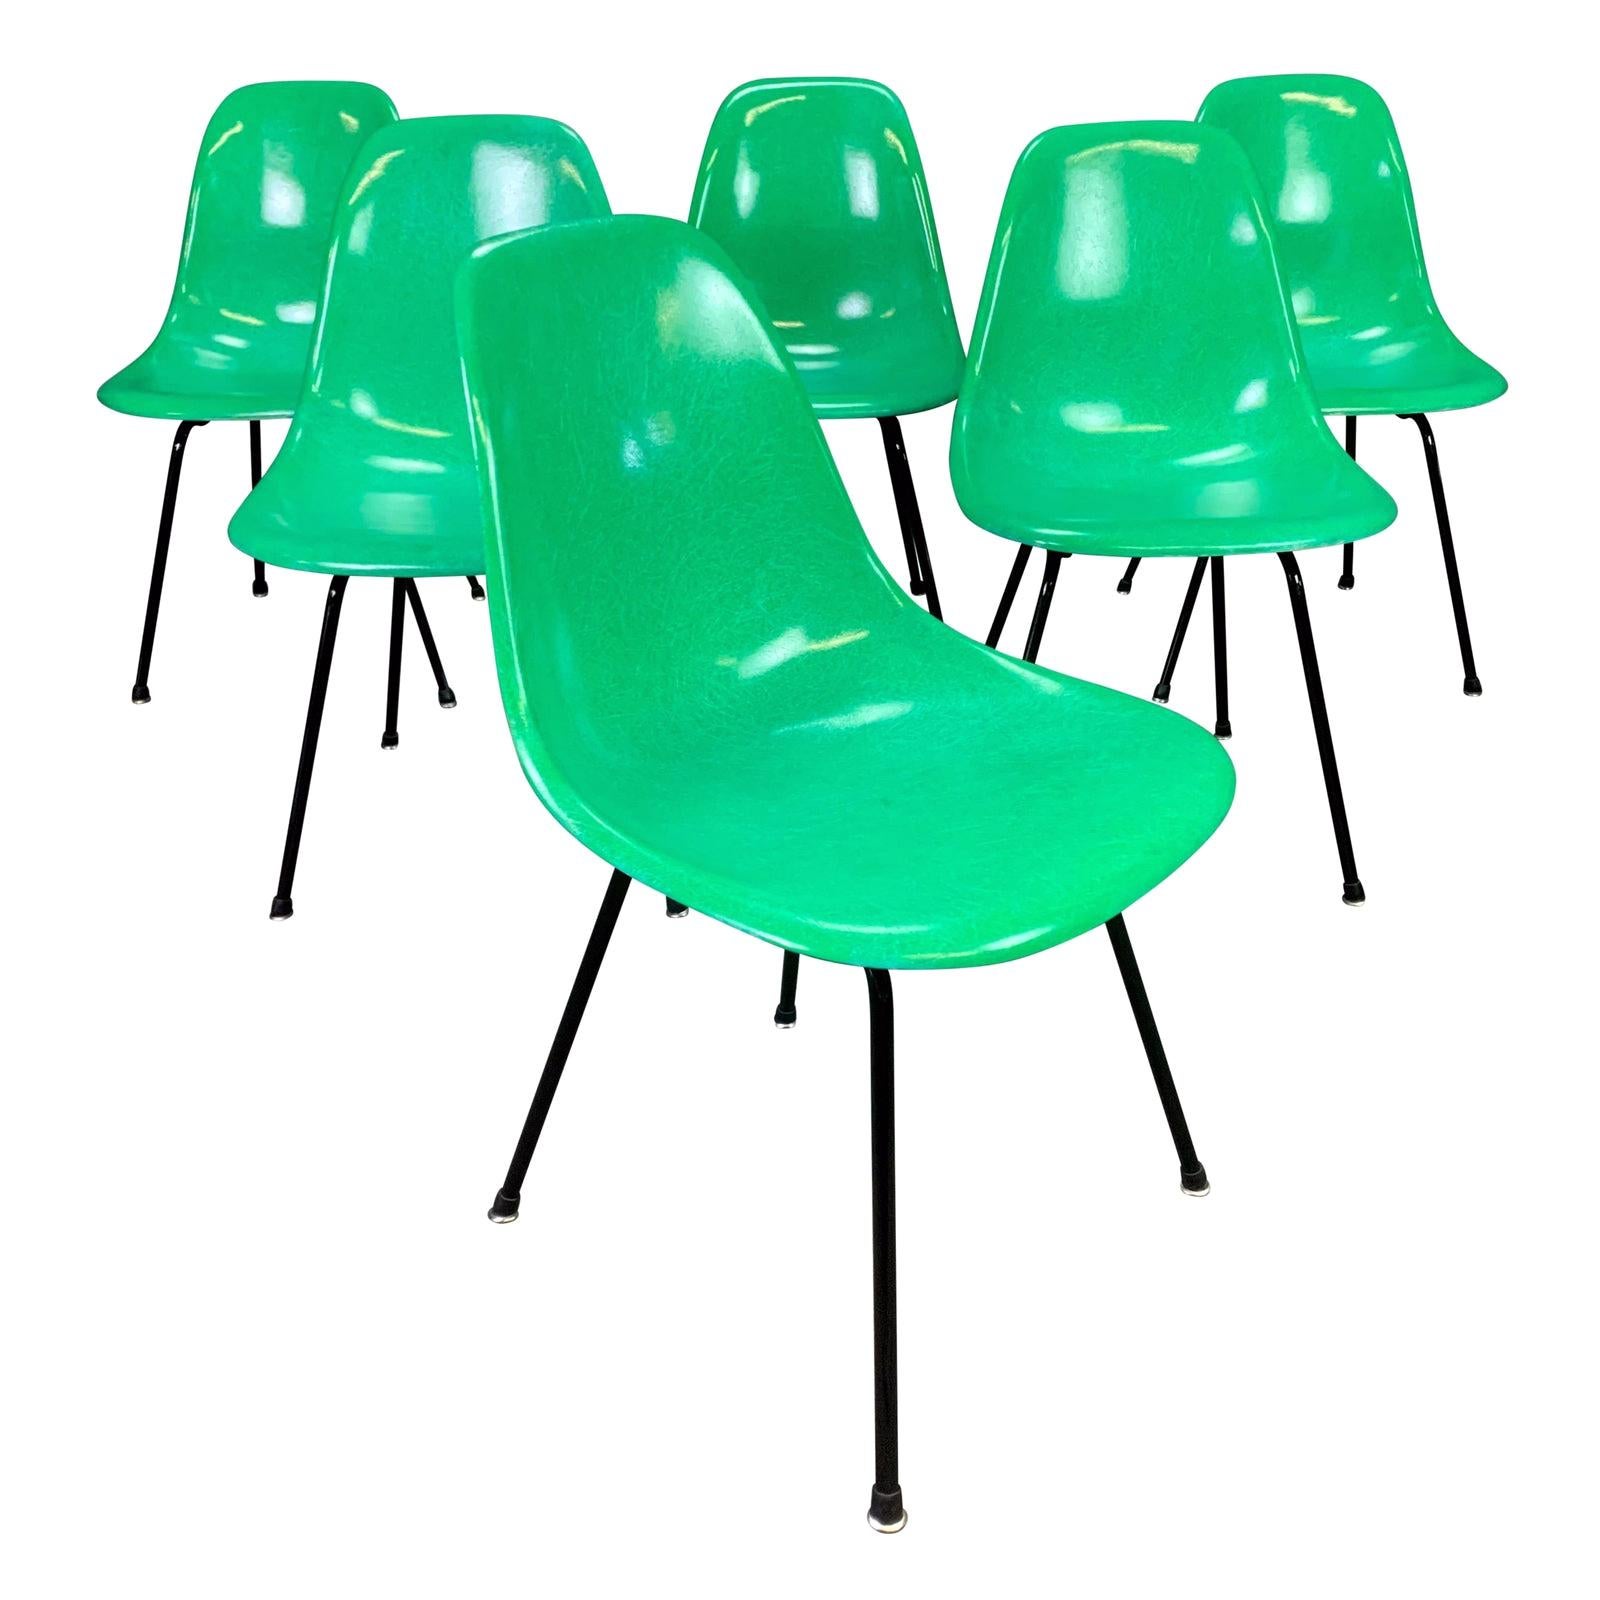 Set of 6 Midcentury DSX Fiberglass Chairs by Charles Eames for Herman Miller